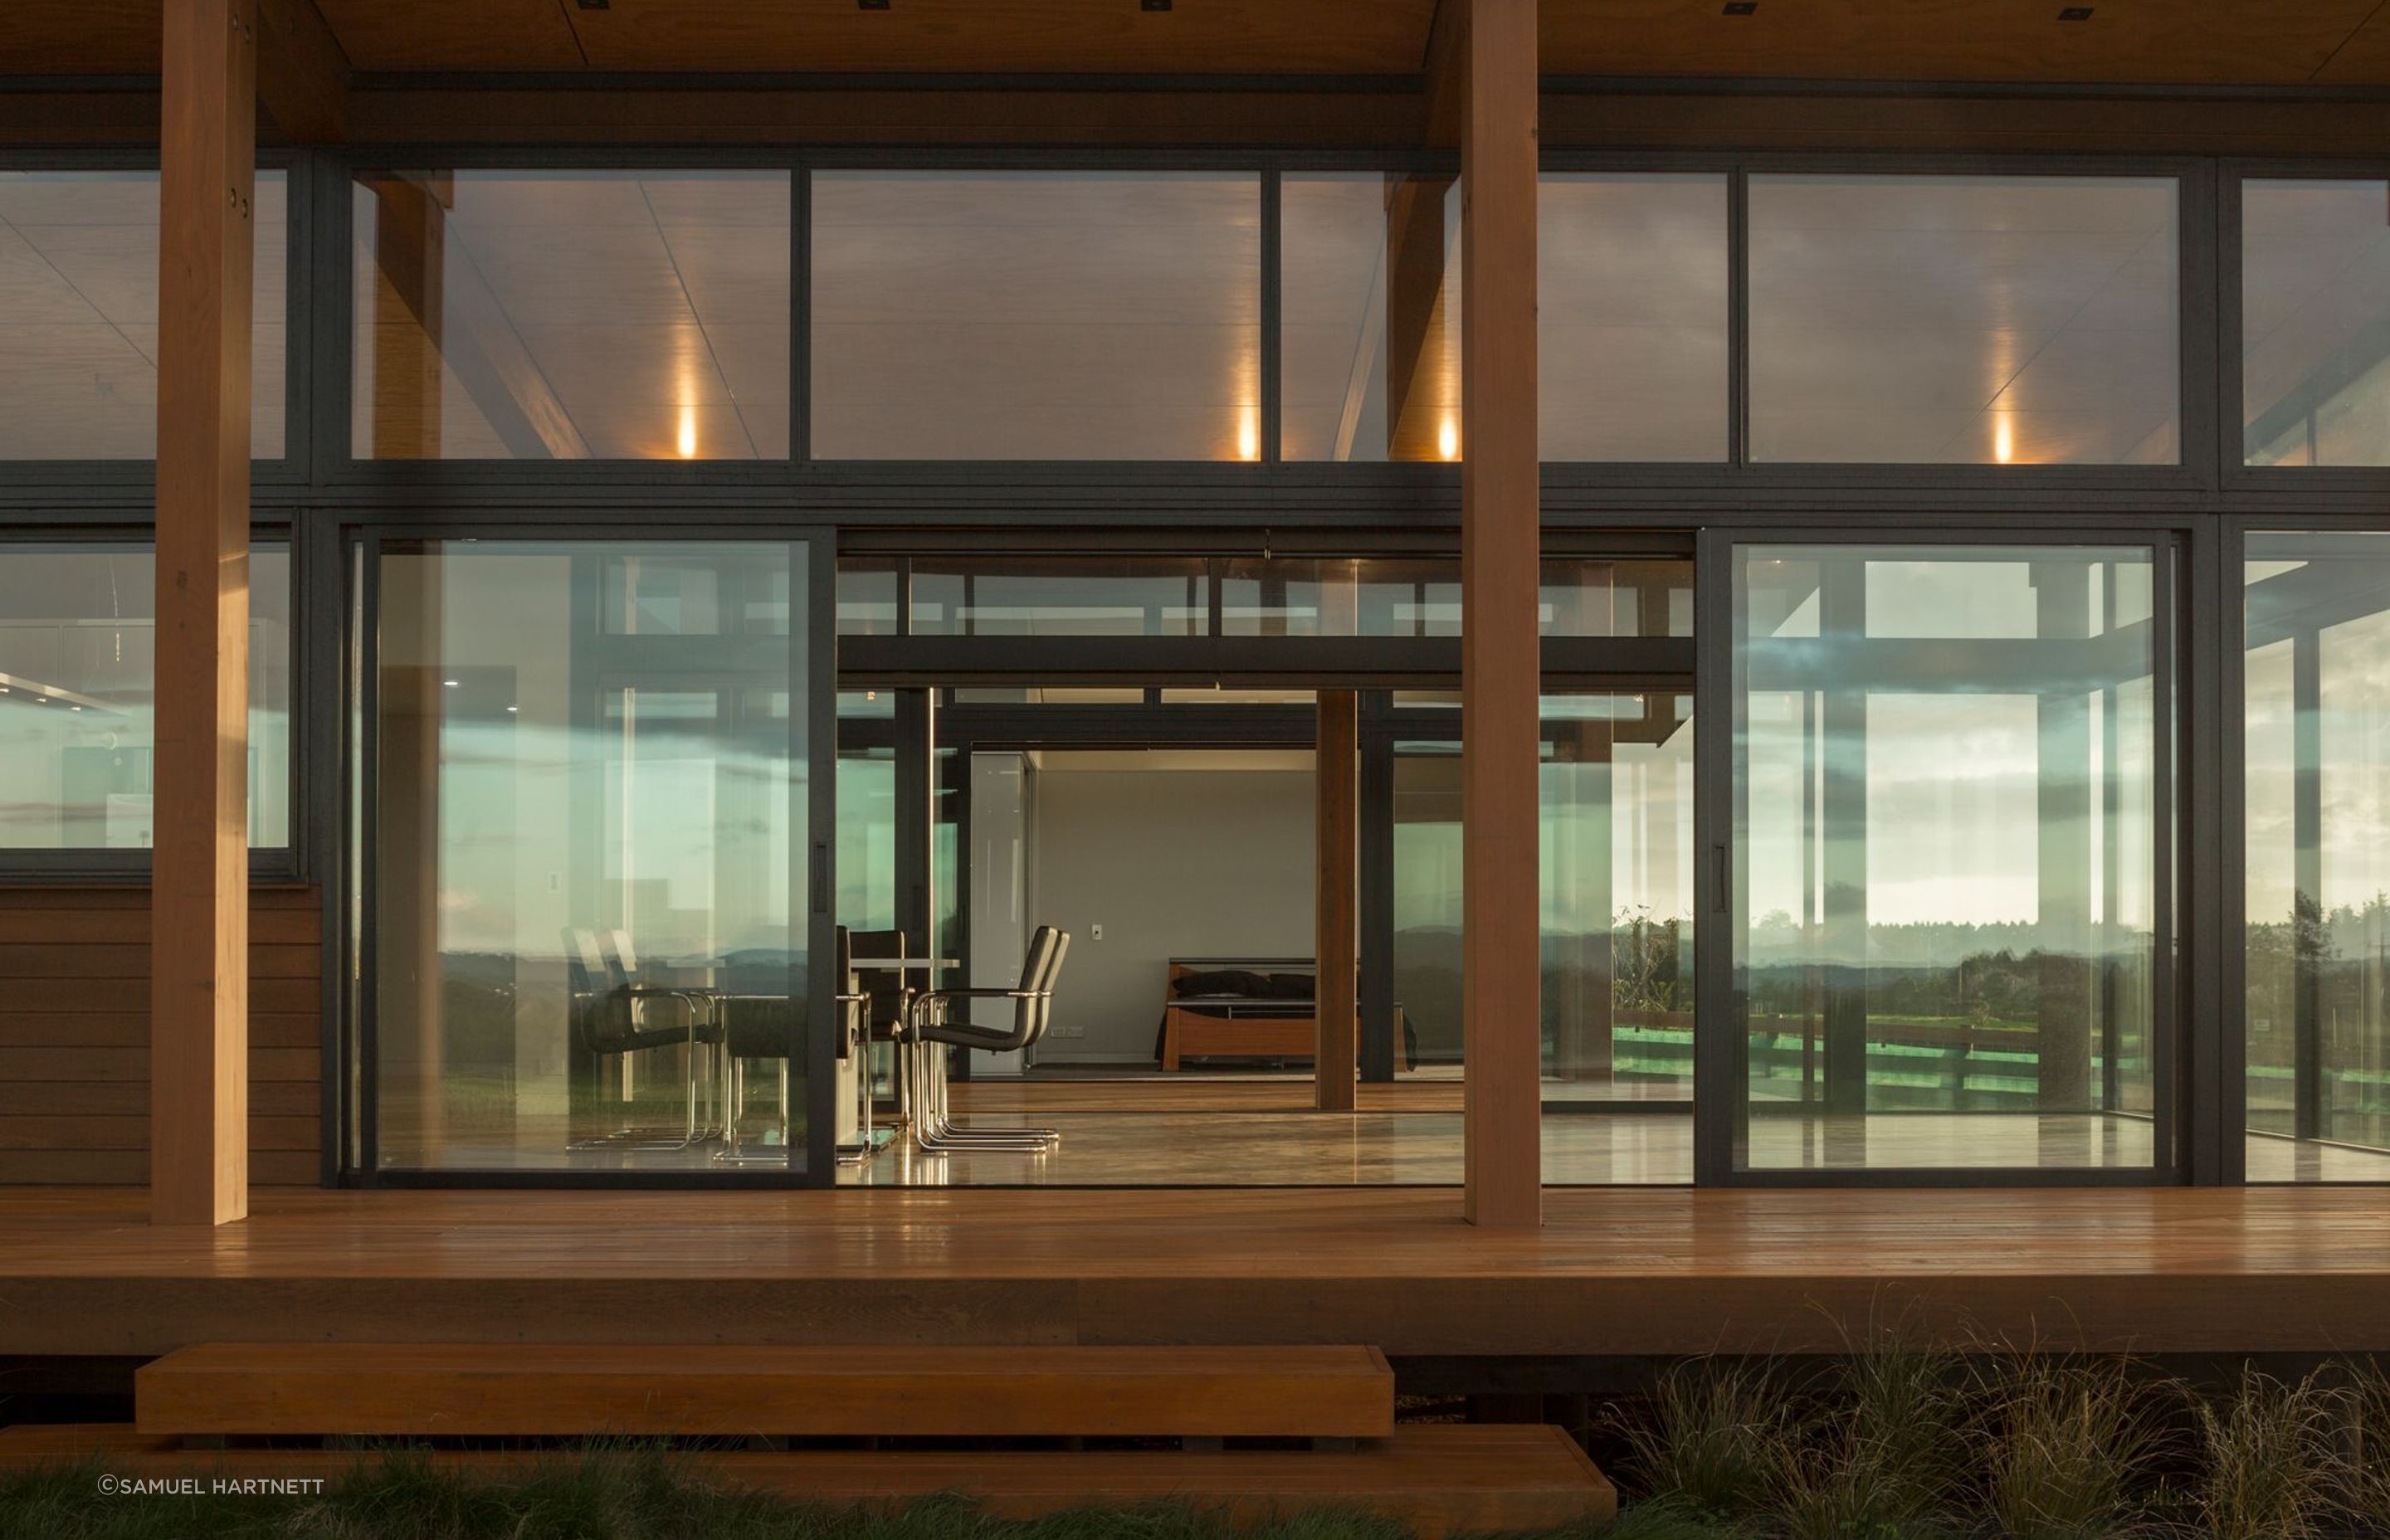 A breezeway separates two pavilions containing open plan living space from the secluded bedroom and bathroom wing.